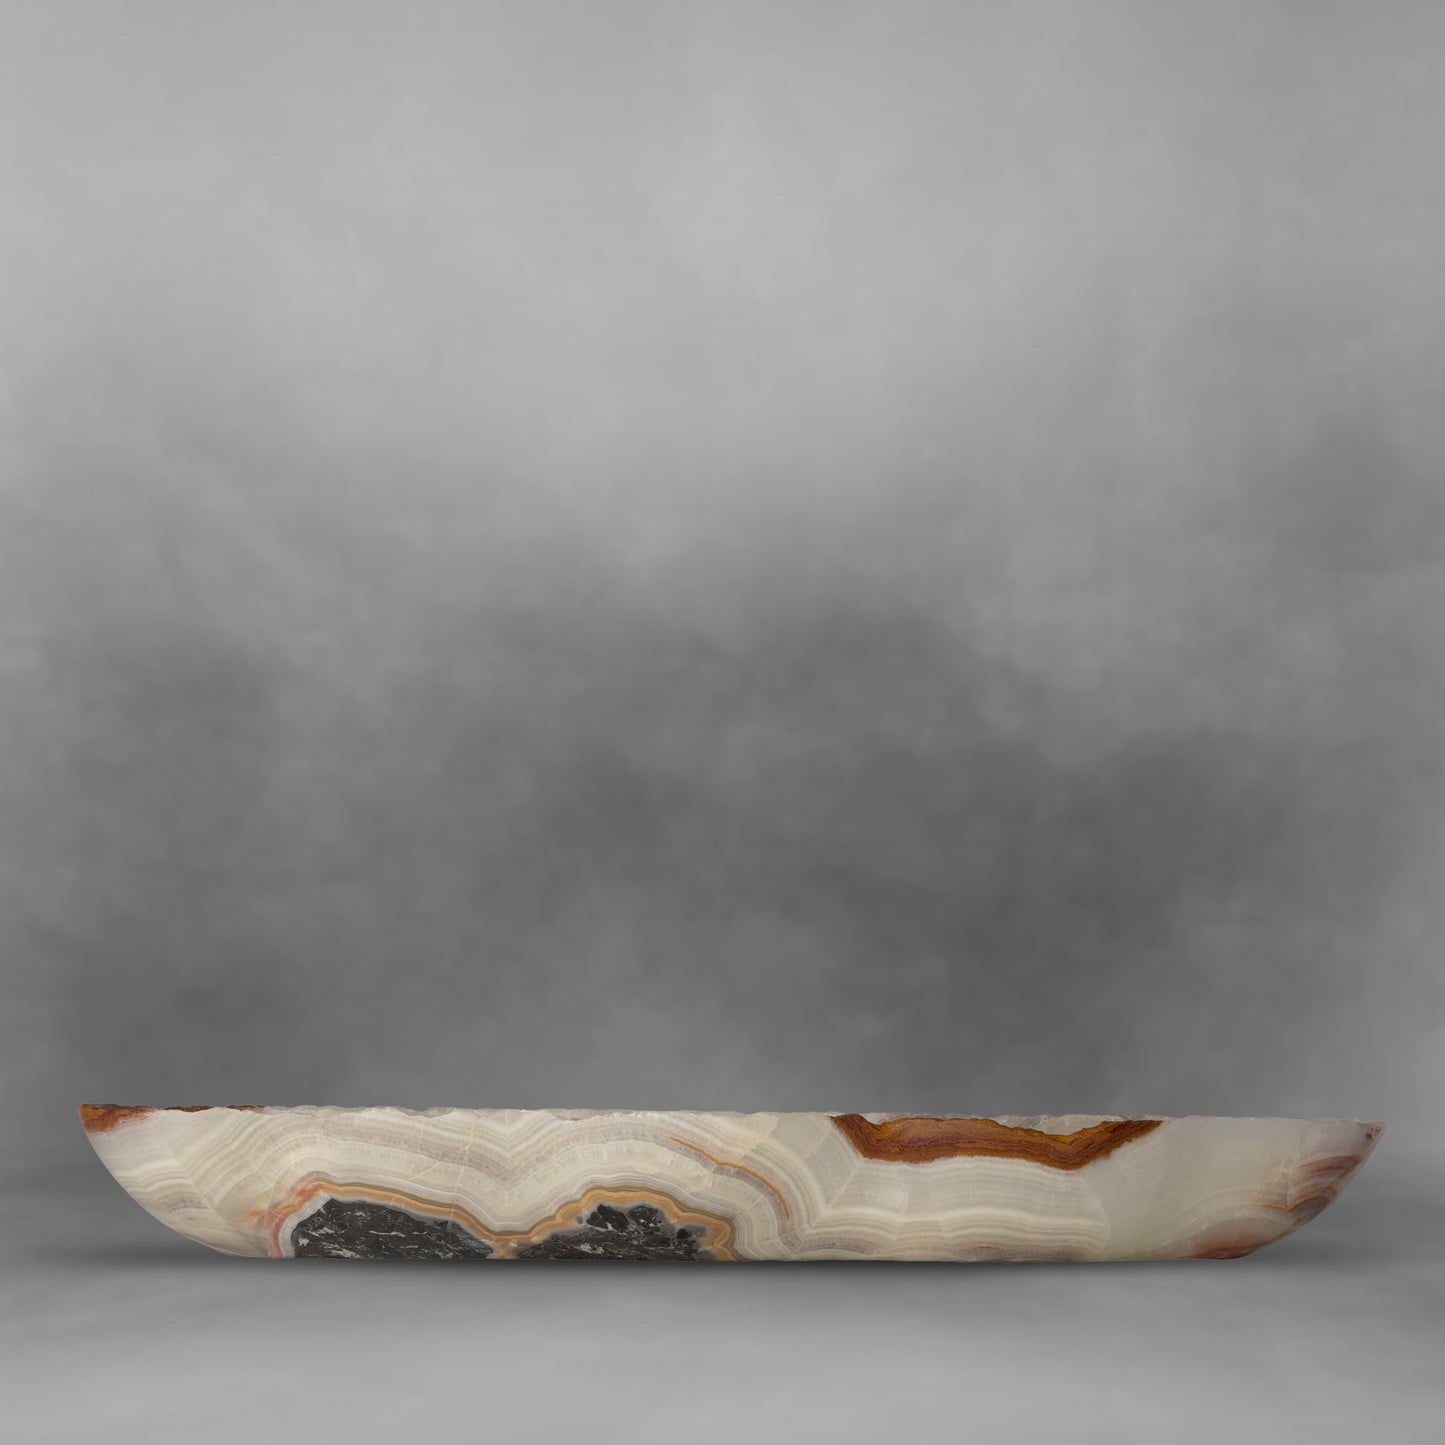 Aesthetic decorative canoe with rare color combination, pearl, black and orange, large onyx bowl